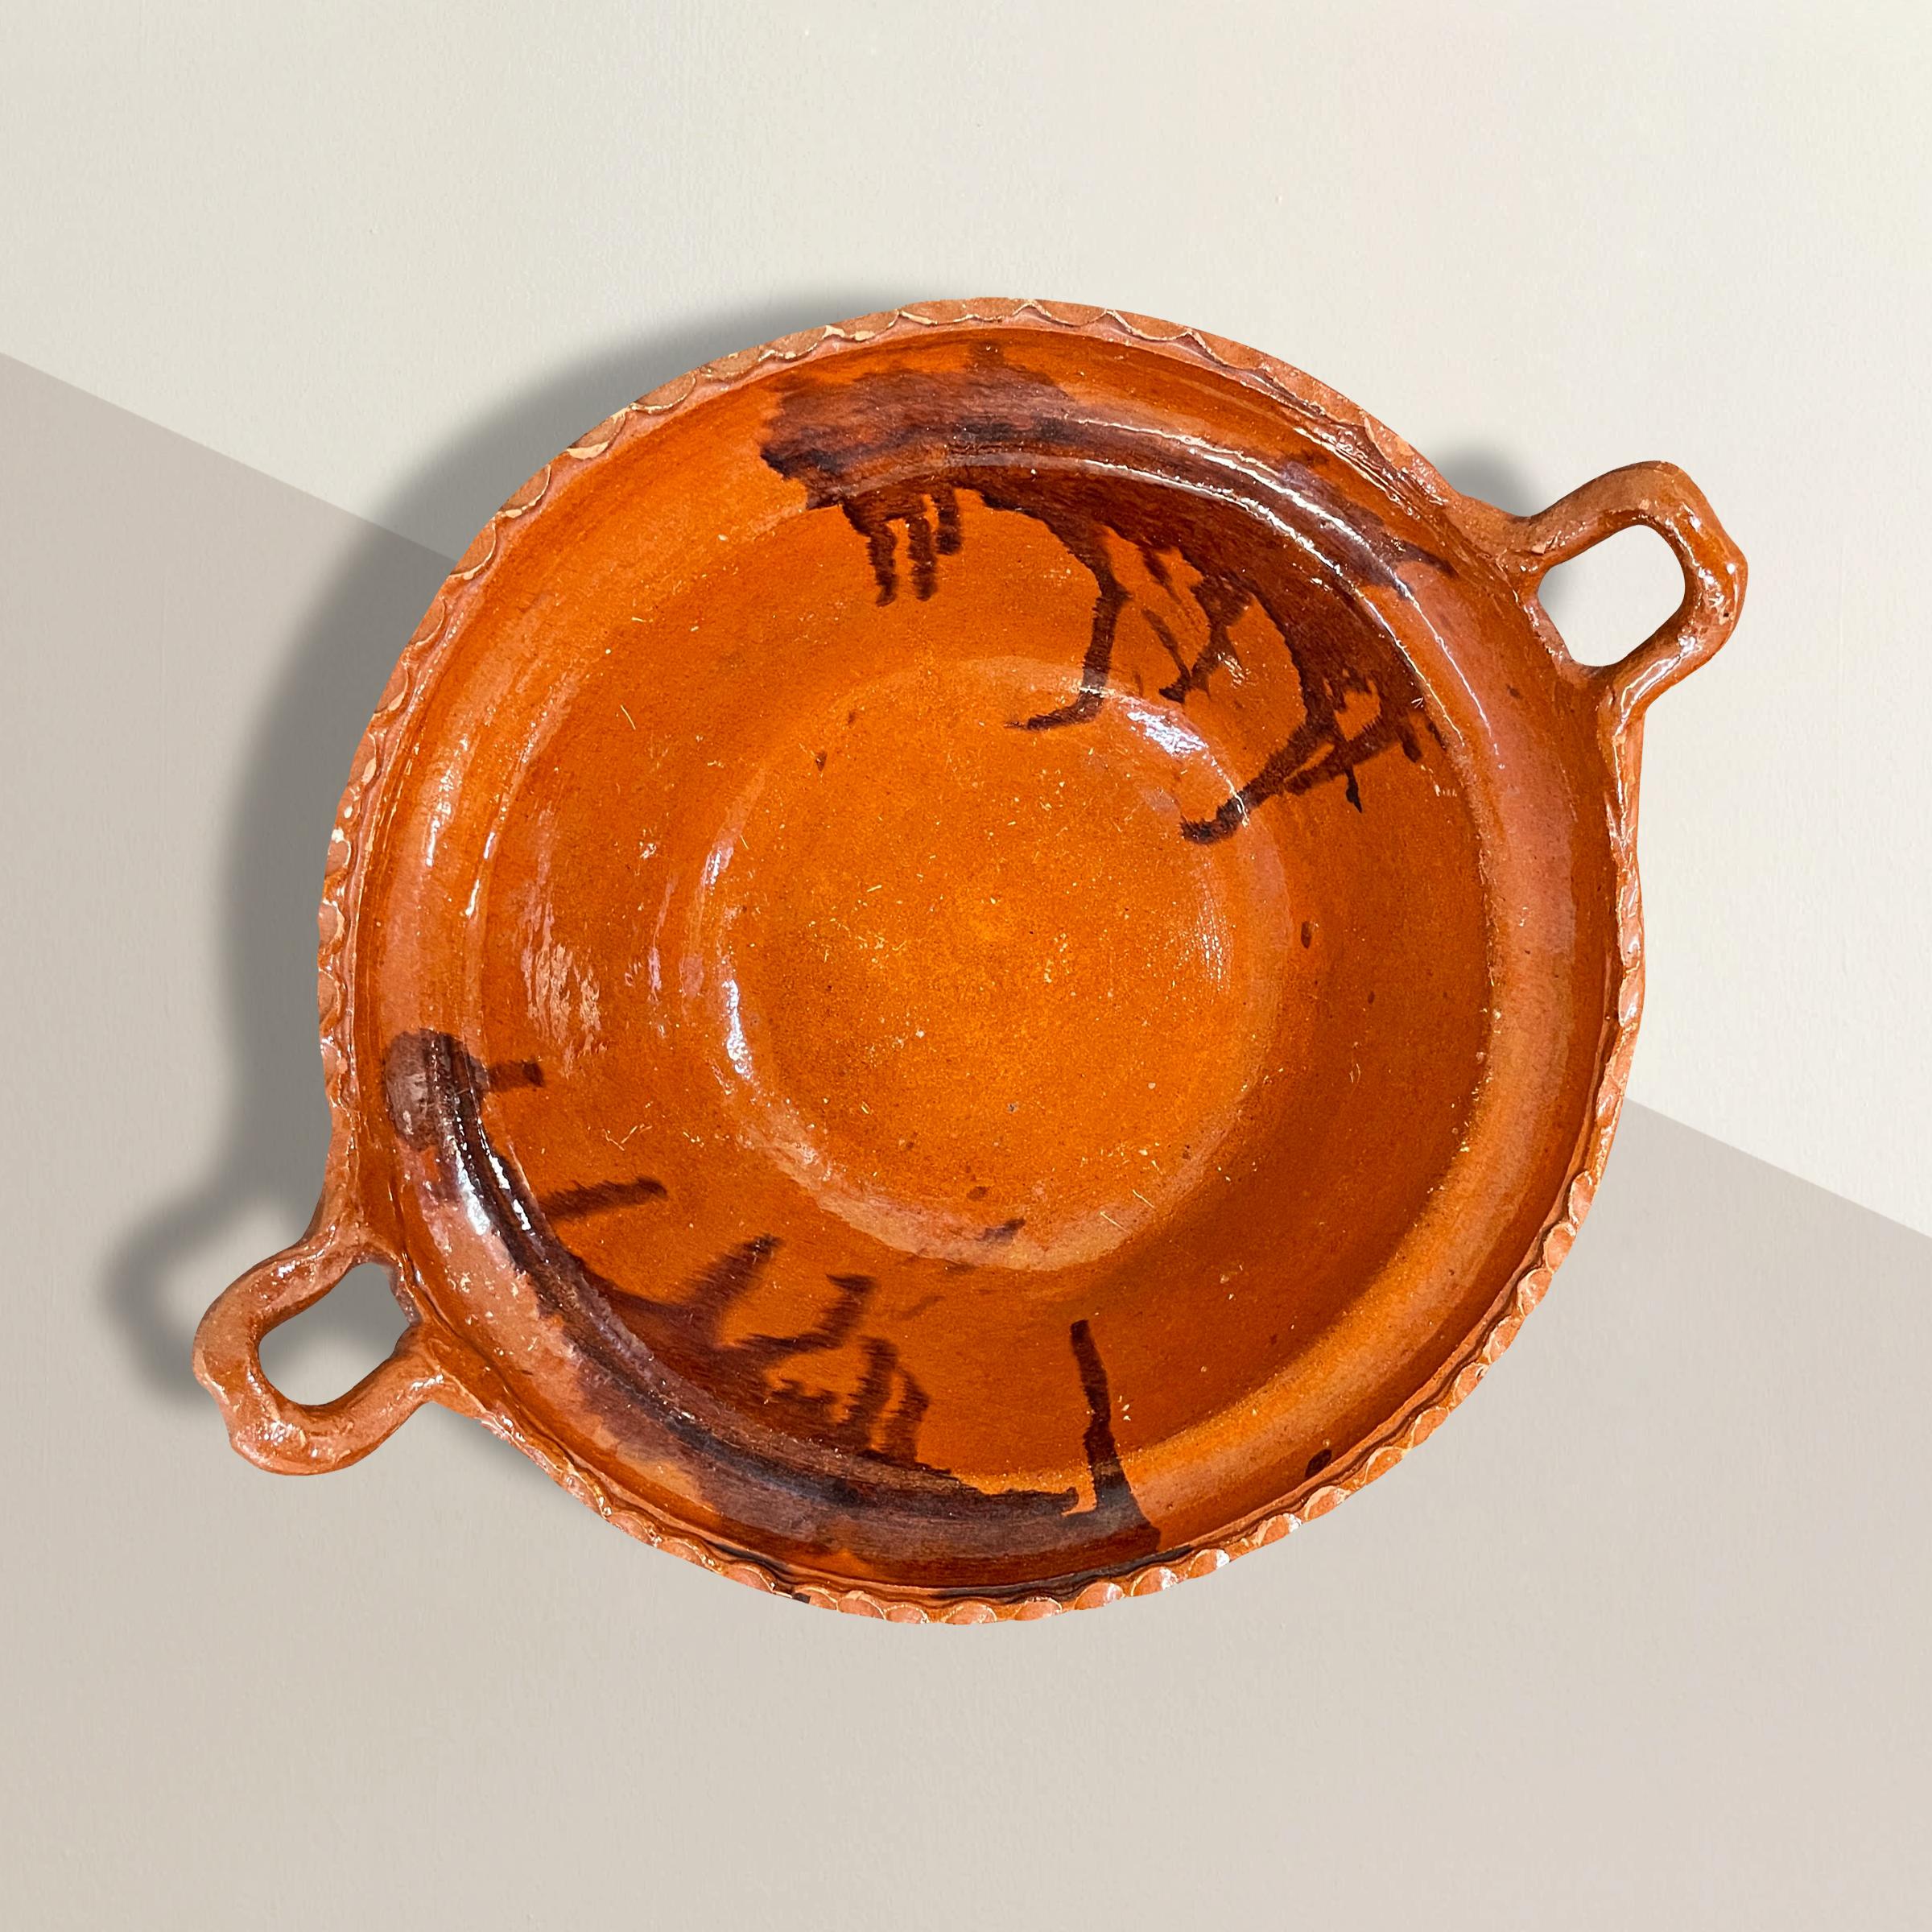 A beautiful vintage Mexican terracotta bowl with two handles, a ruffled lip, two large drip glazed splotches inside. The exterior is unglazed. Perfect for holding fruits and vegetables on your kitchen island, or ask us about having a custom mount